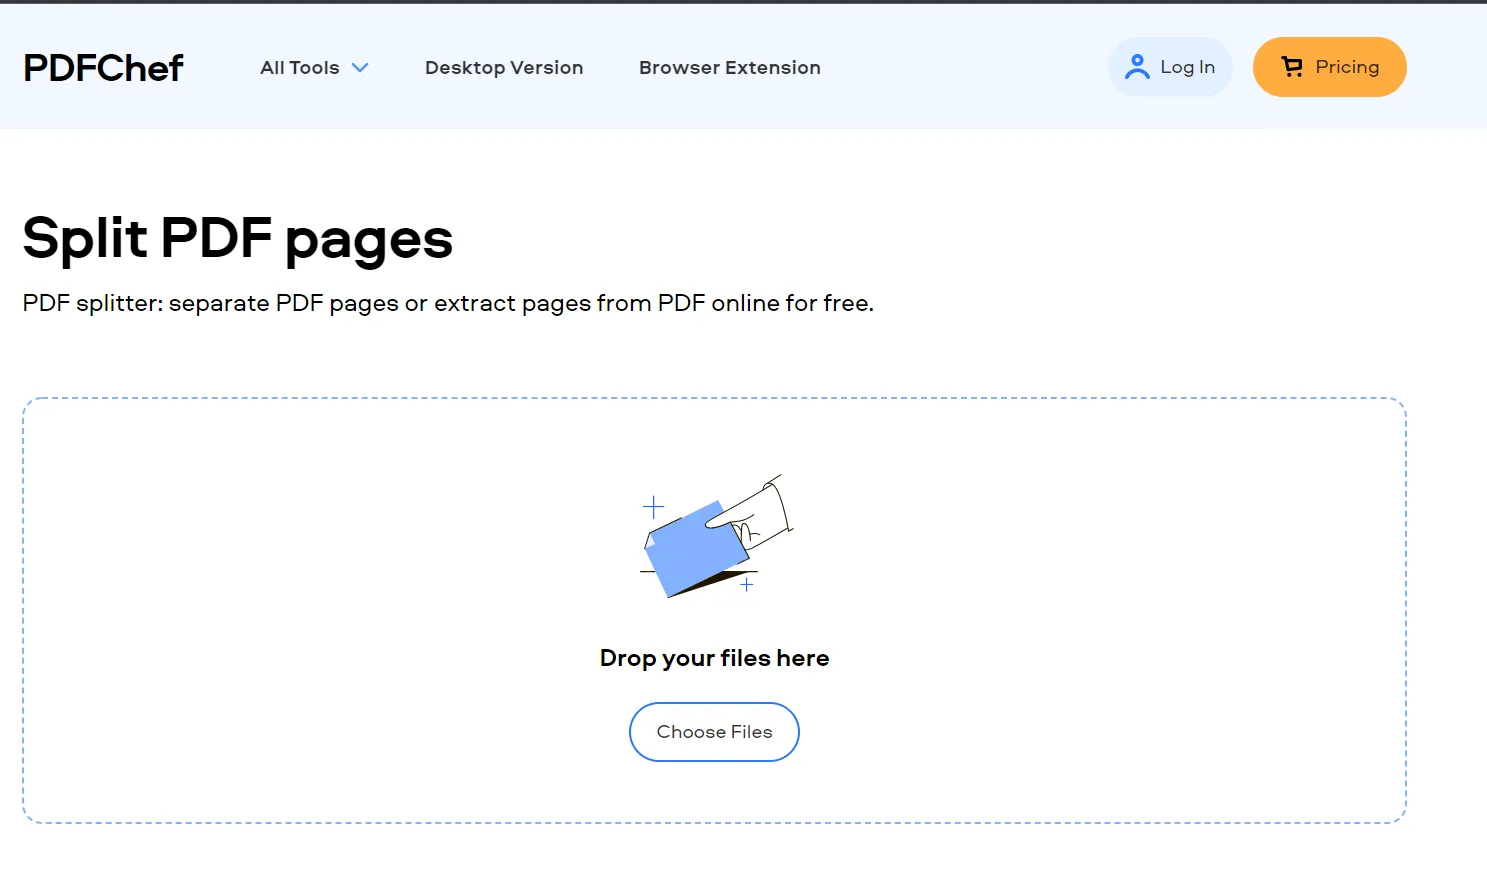 How to Separate PDF Pages, Figure 8: PDFChef with Split PDF pages function